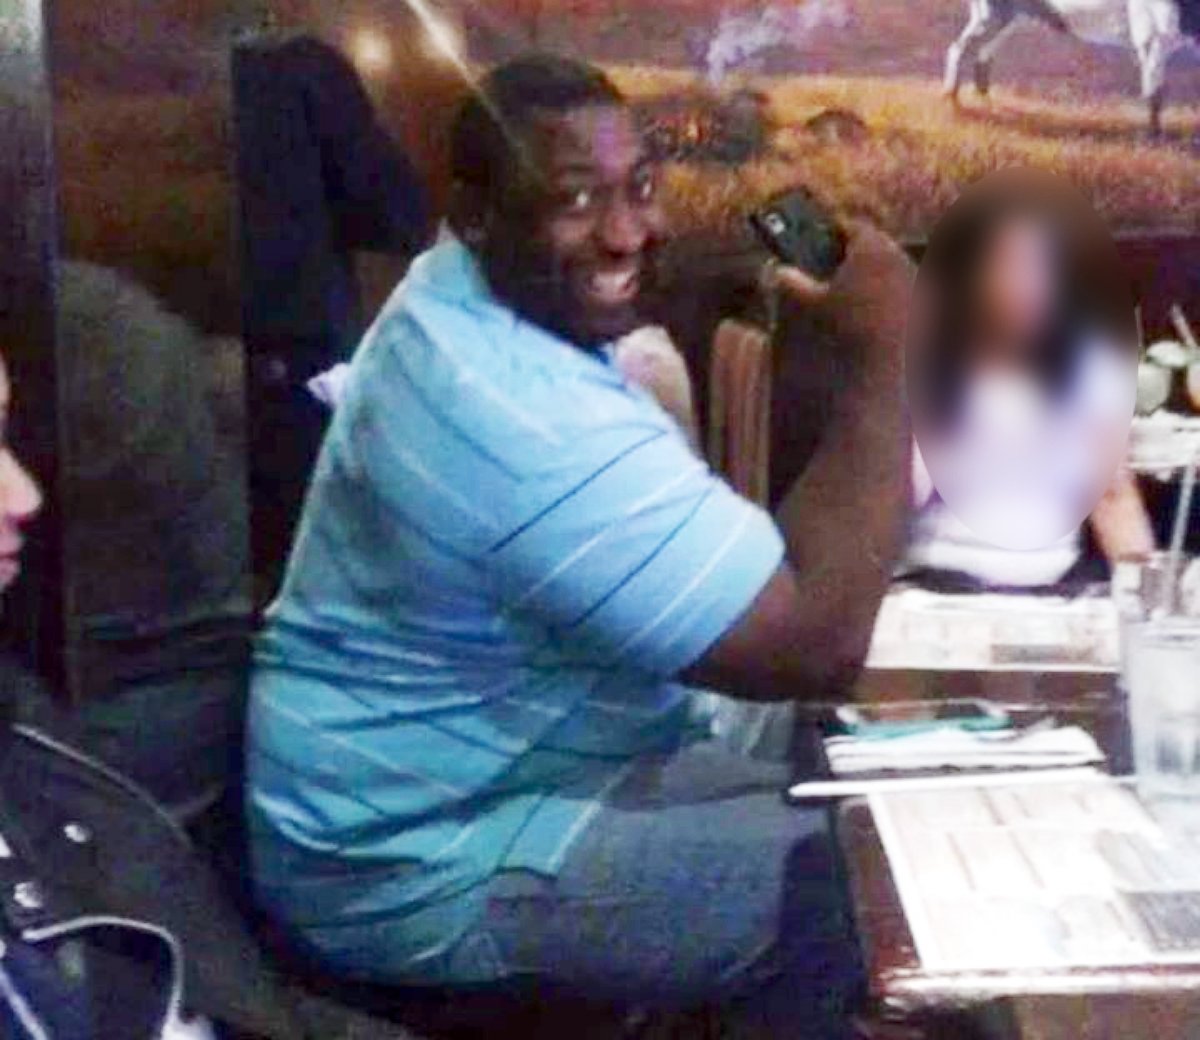 PHOTO: Eric Garner, seen in this undated Facebook photo, died while being arrested by police in Staten Island.